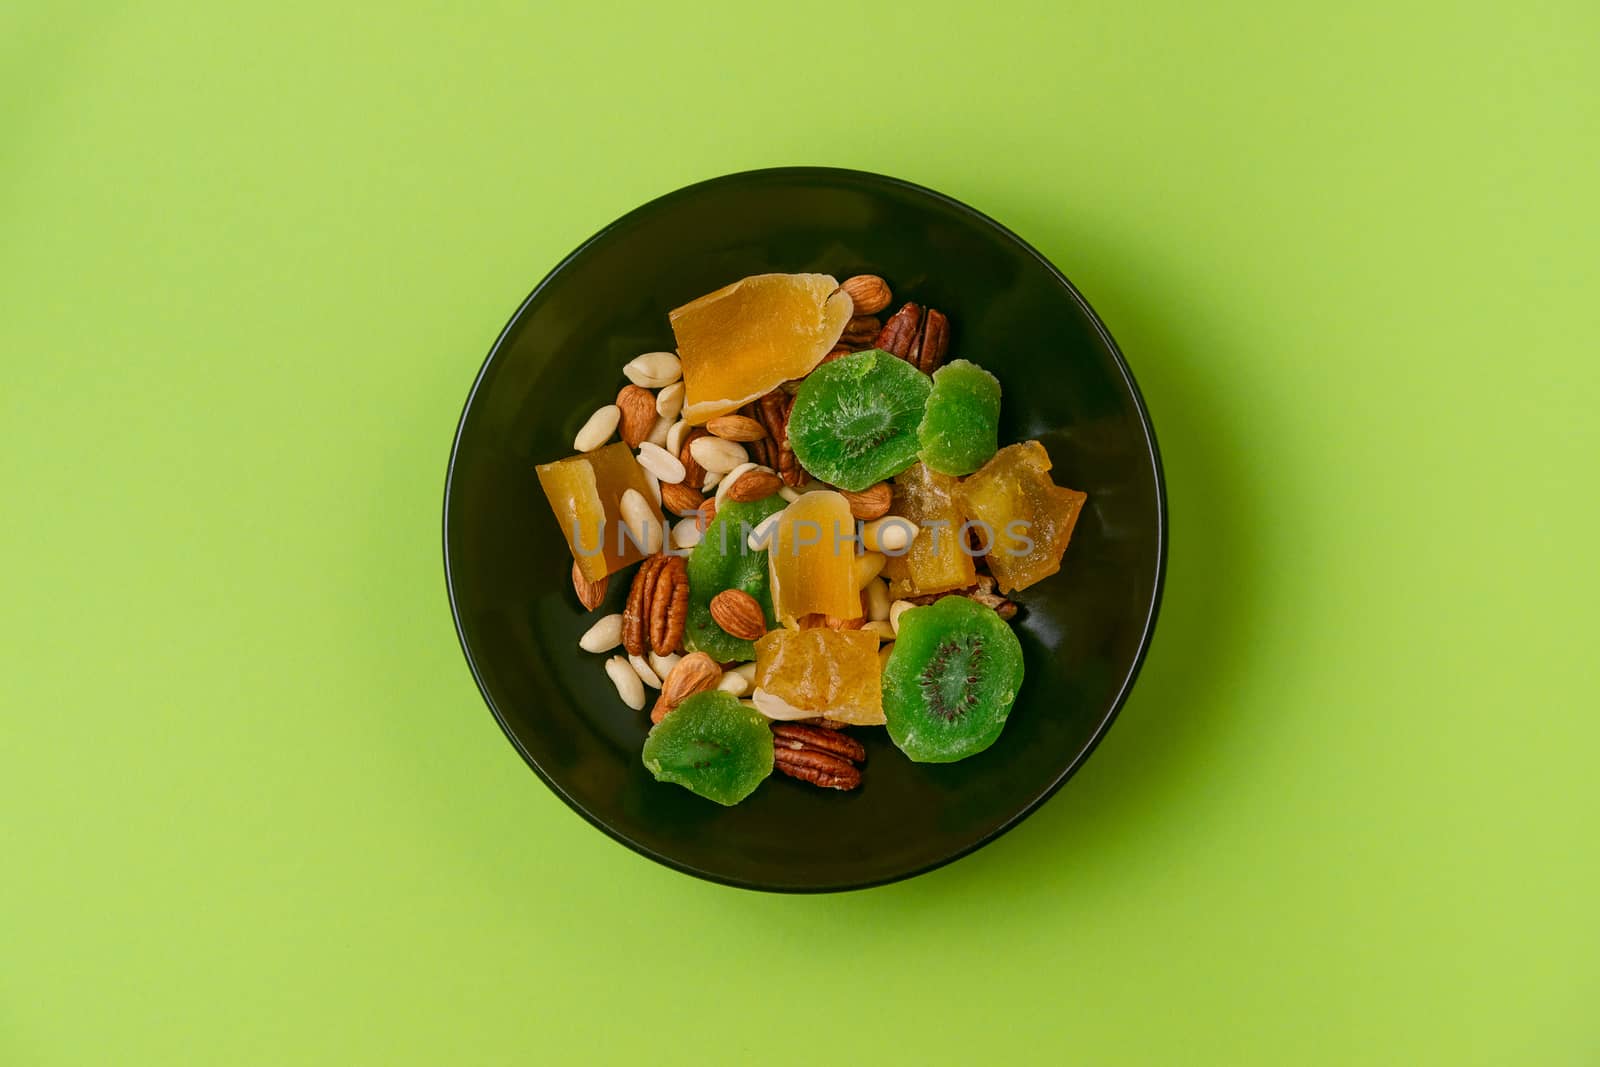 A fresh dried and candied fruits and nuts in black bowl on green bakground. Concept of nutrient and healty breakfast or meal and vegan or vegetarian food.